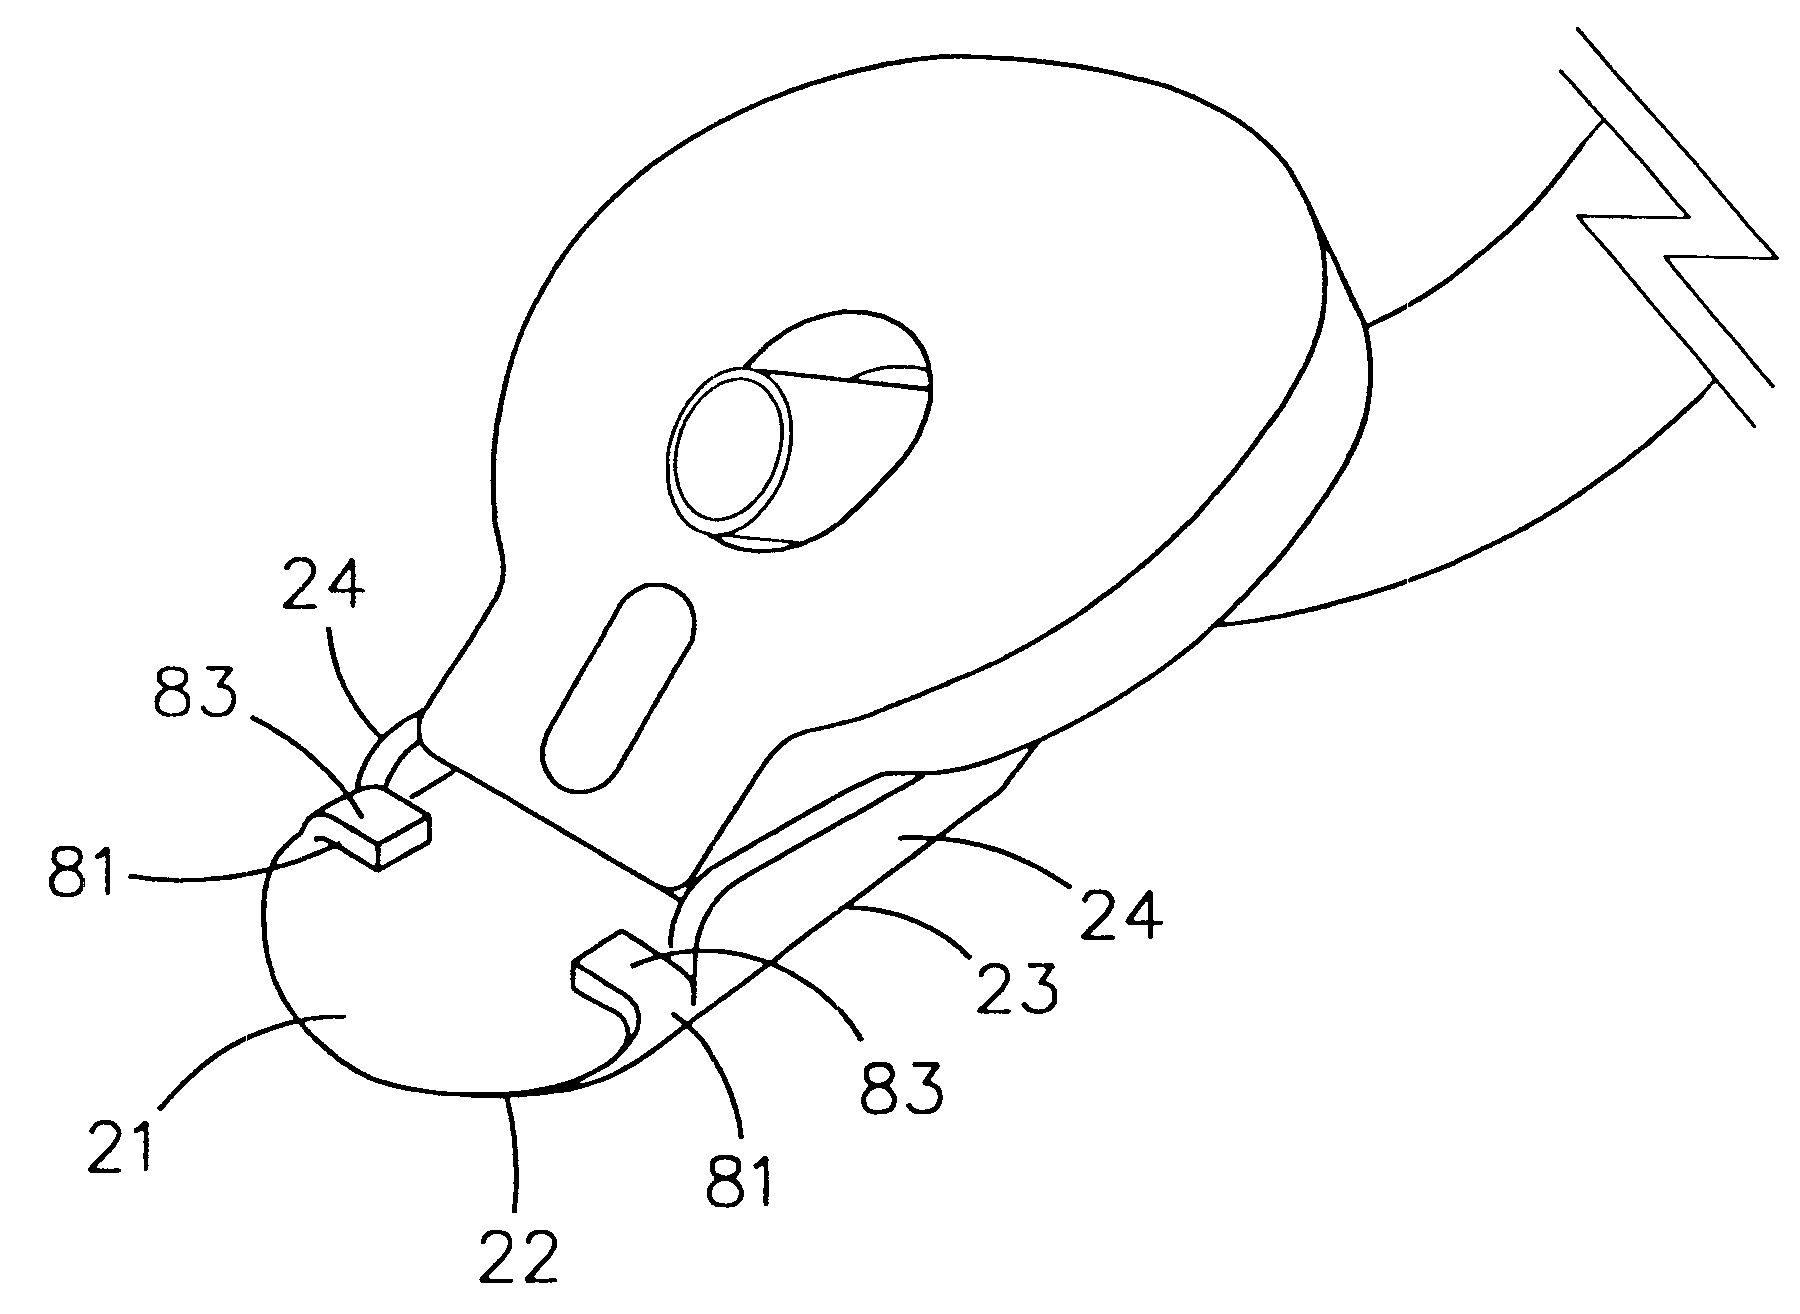 Airway device with provision for coupling to an introducer